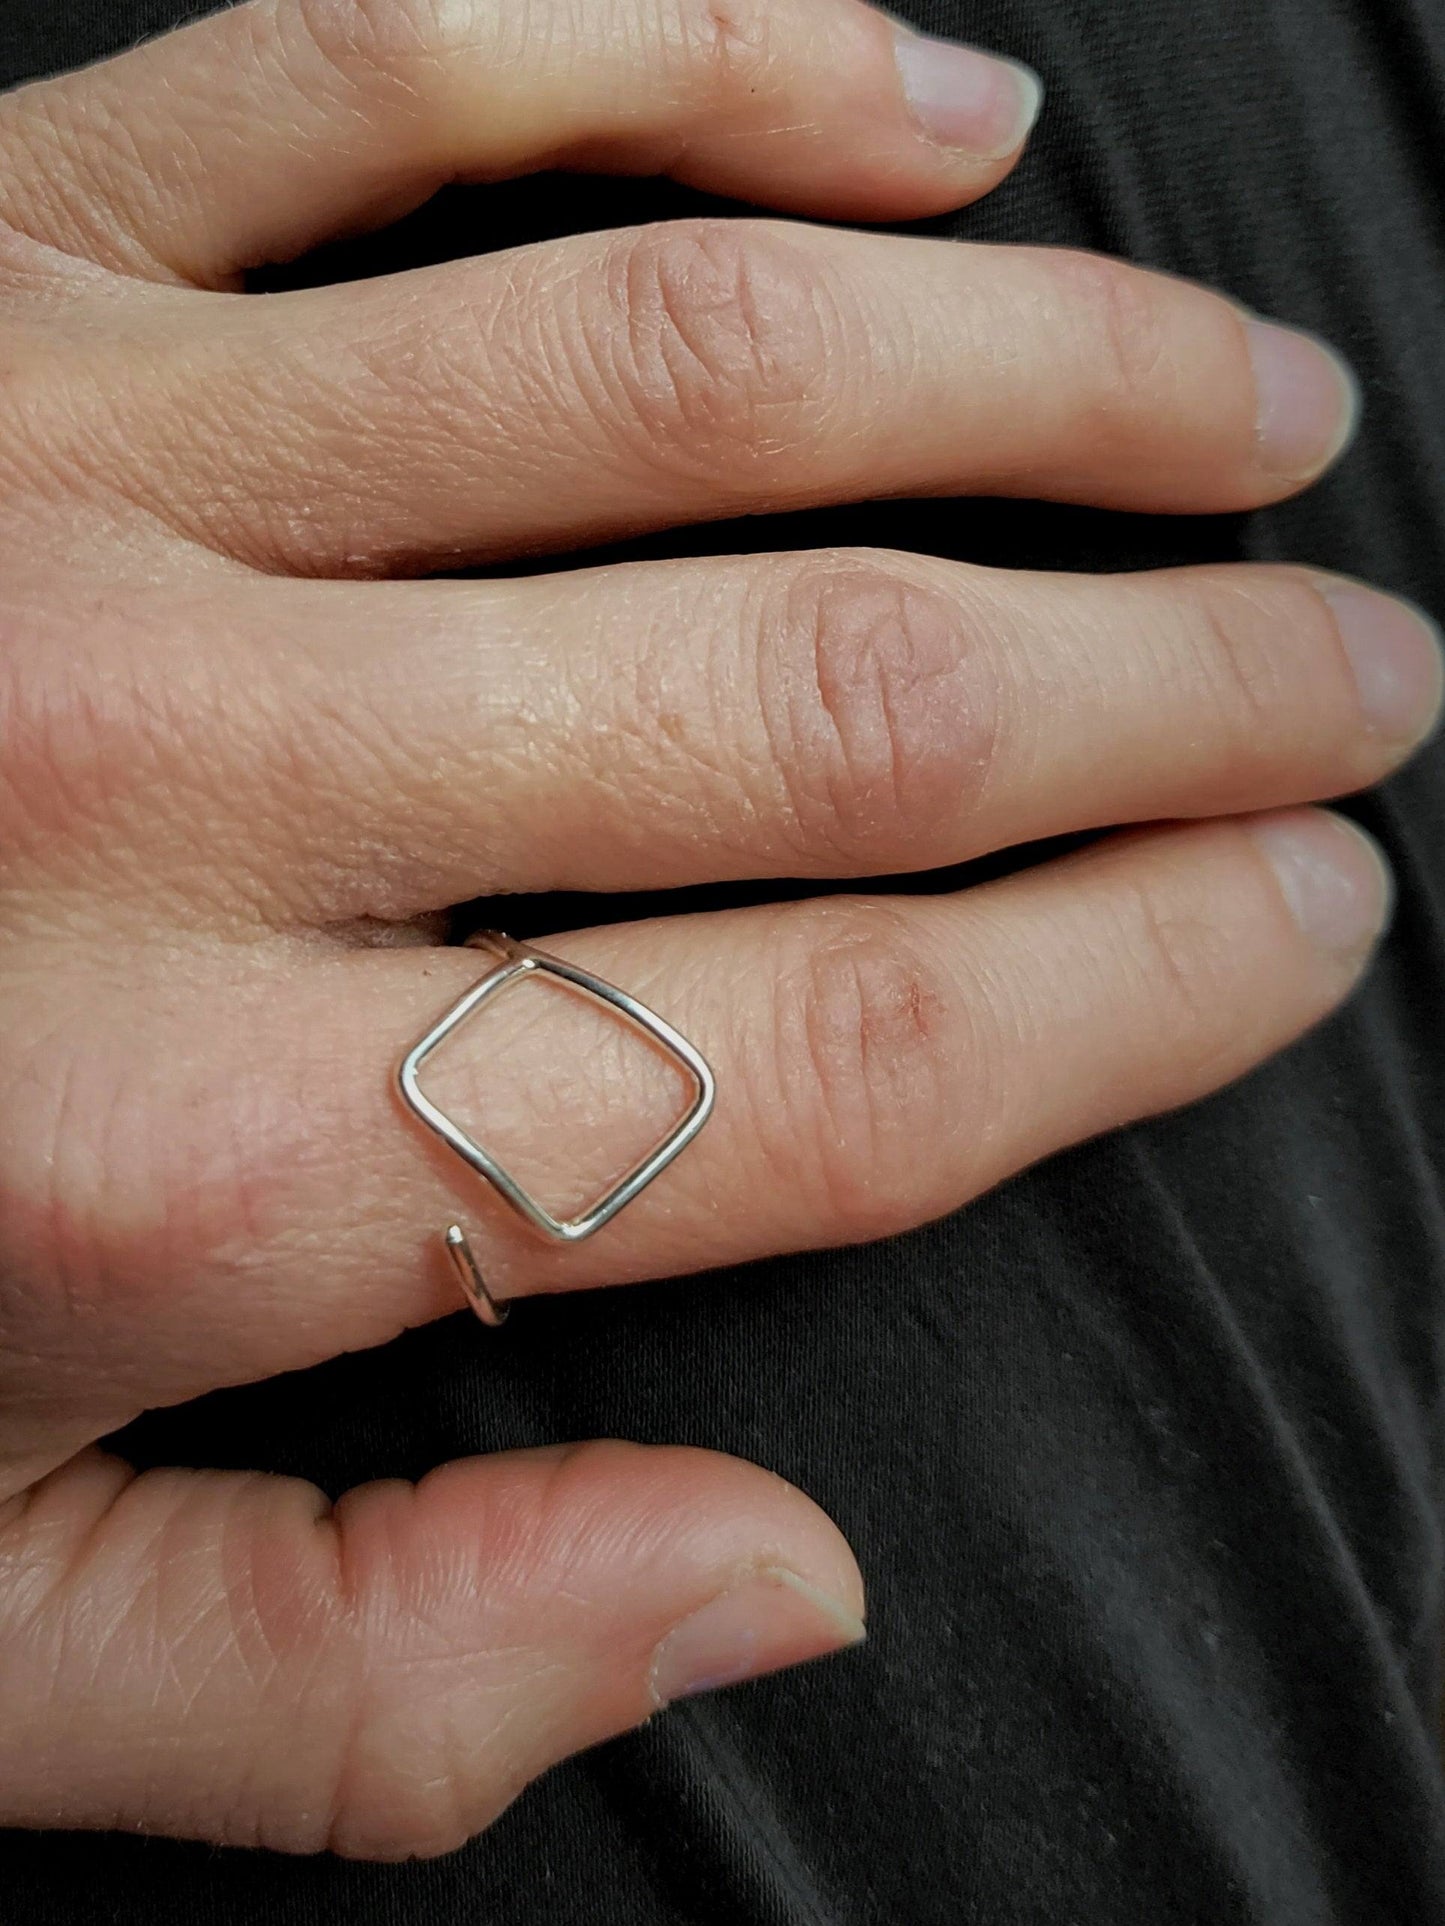 Box Breathing adjustable rings that remind you to use breathing exercises to find calm when anxious or overwhelmed. 